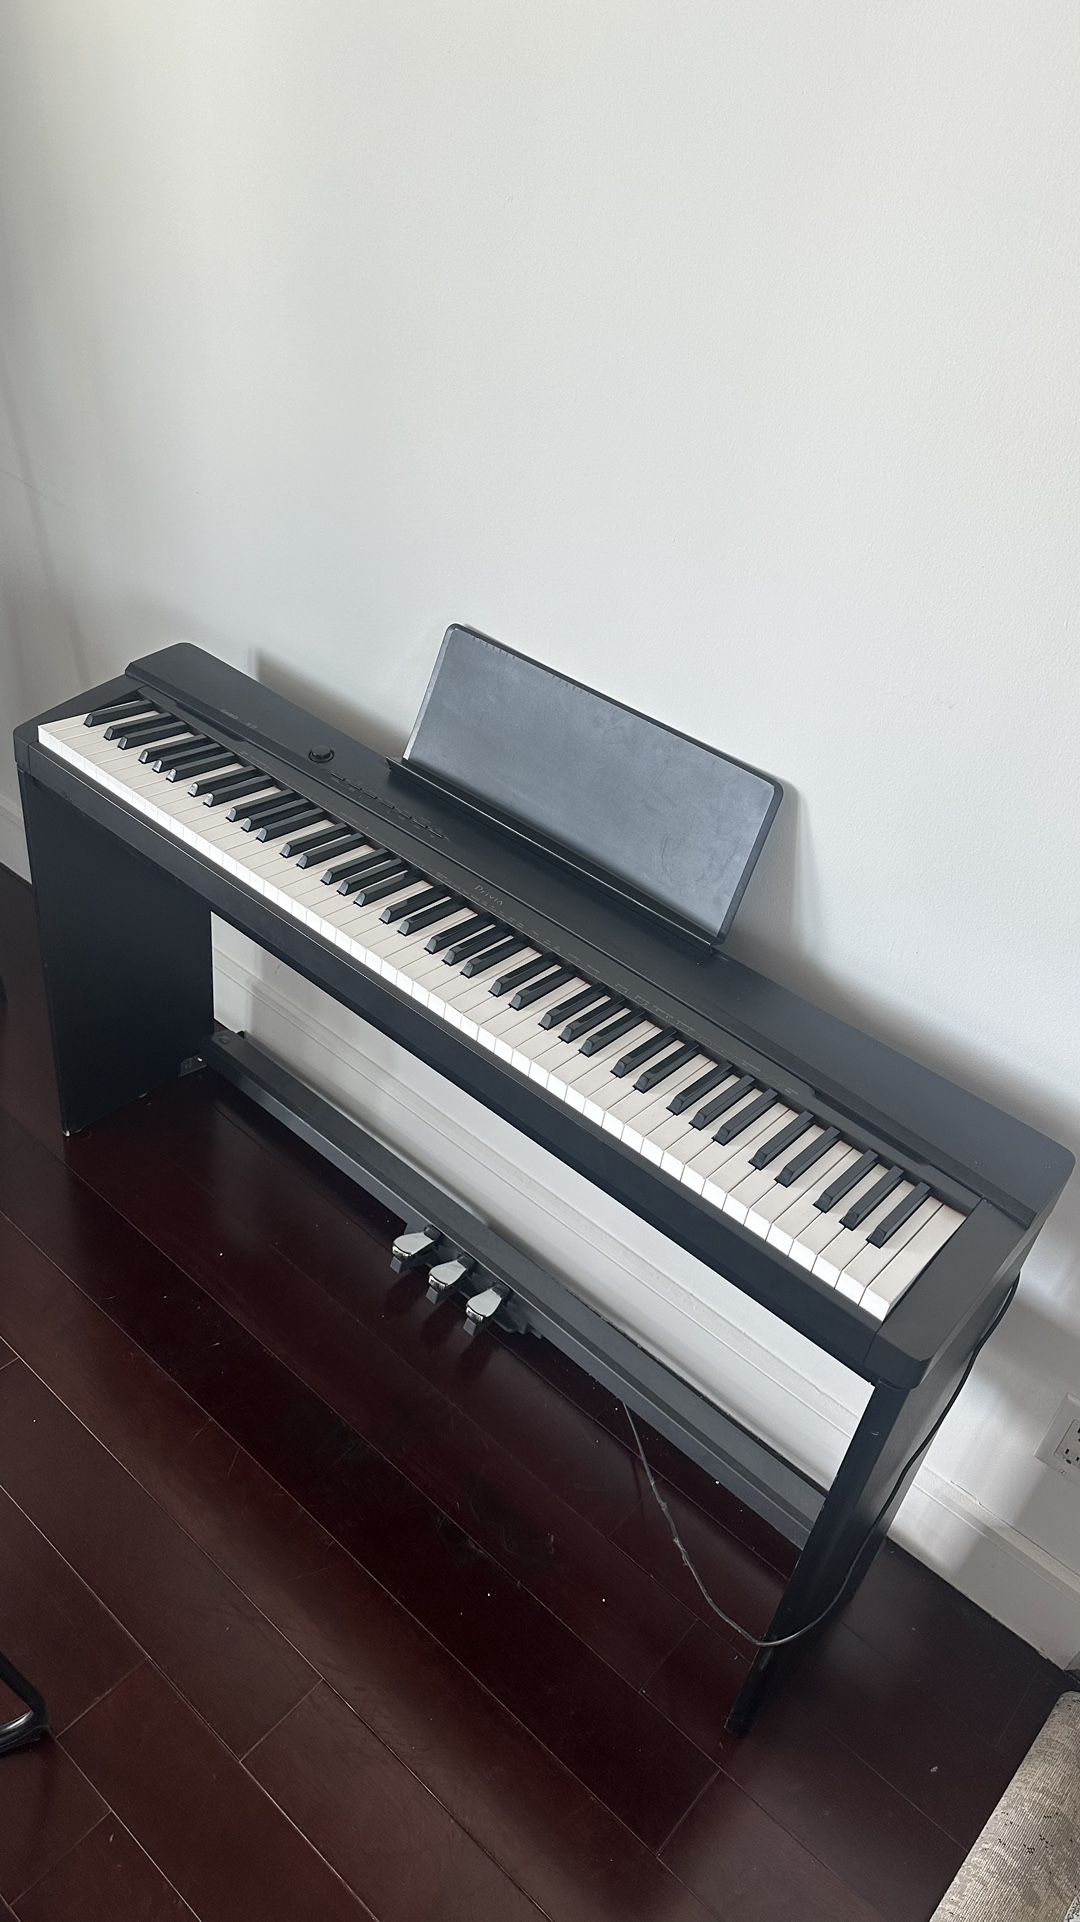 Casio Privia PX-135 weighted key digital Piano